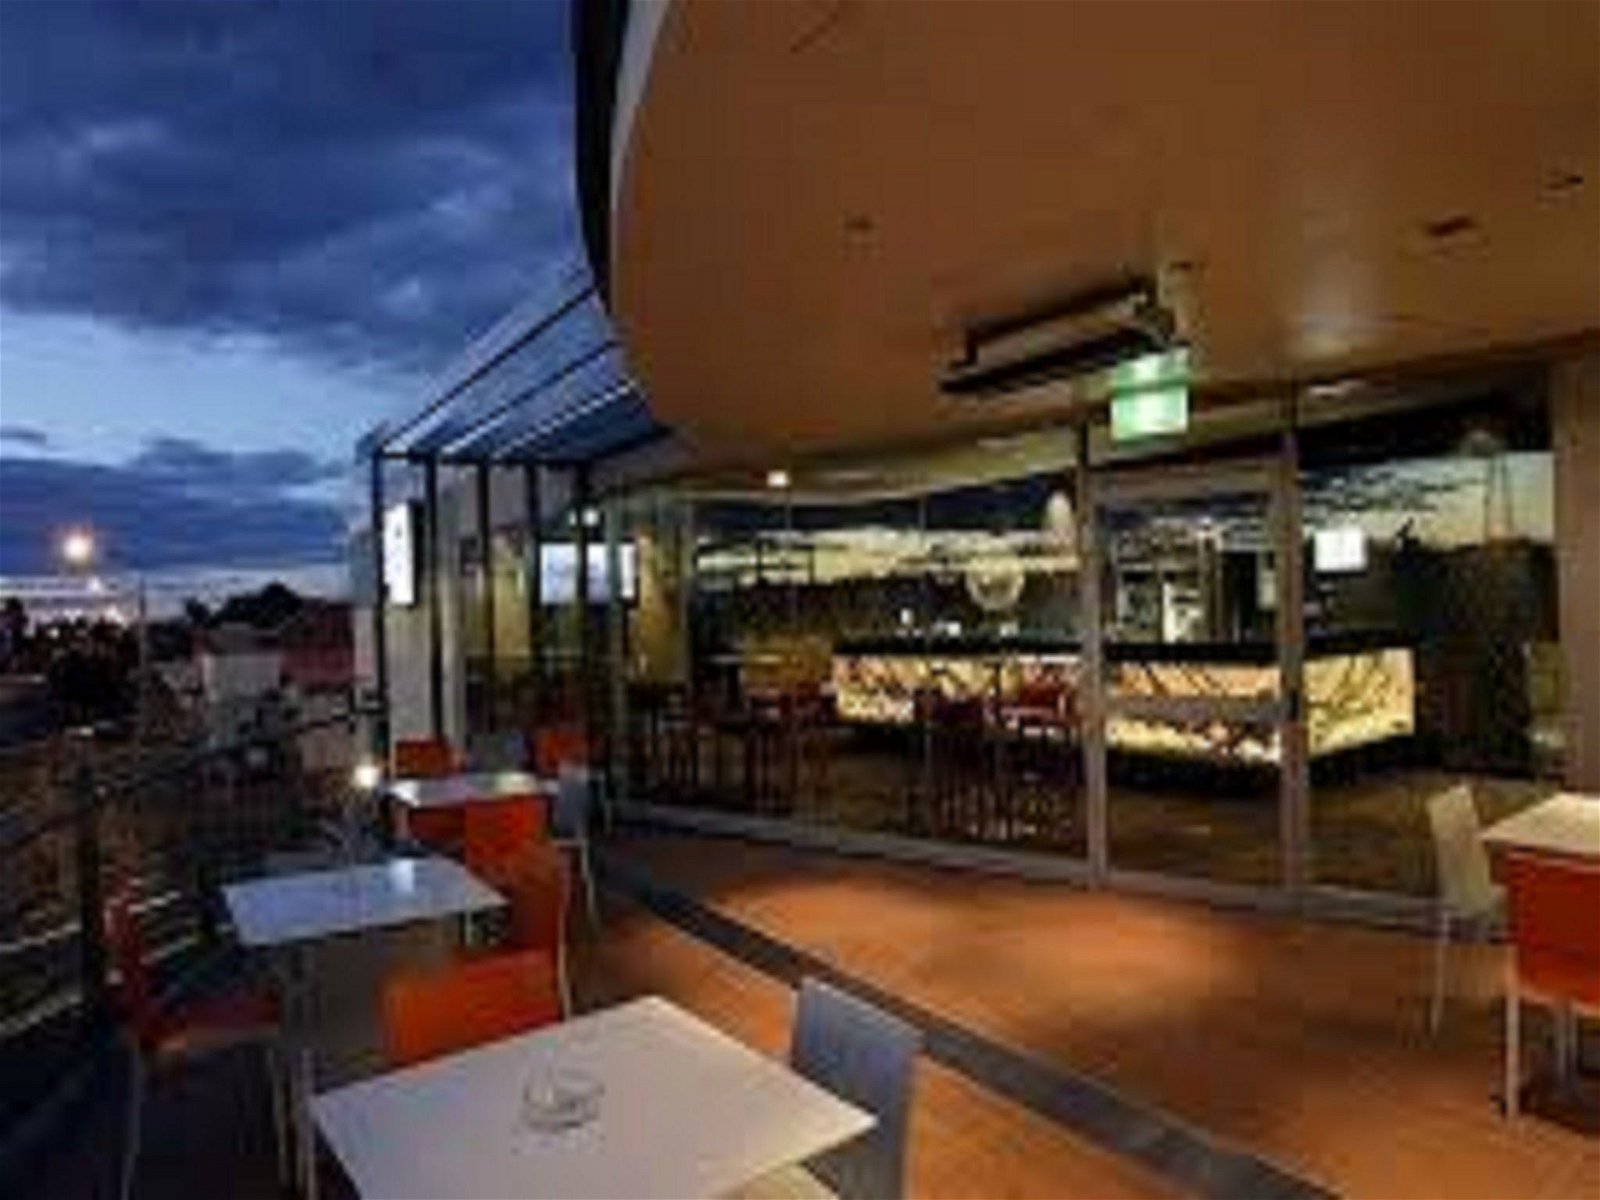 One Seven Eight Dining and Bar - Pubs Sydney